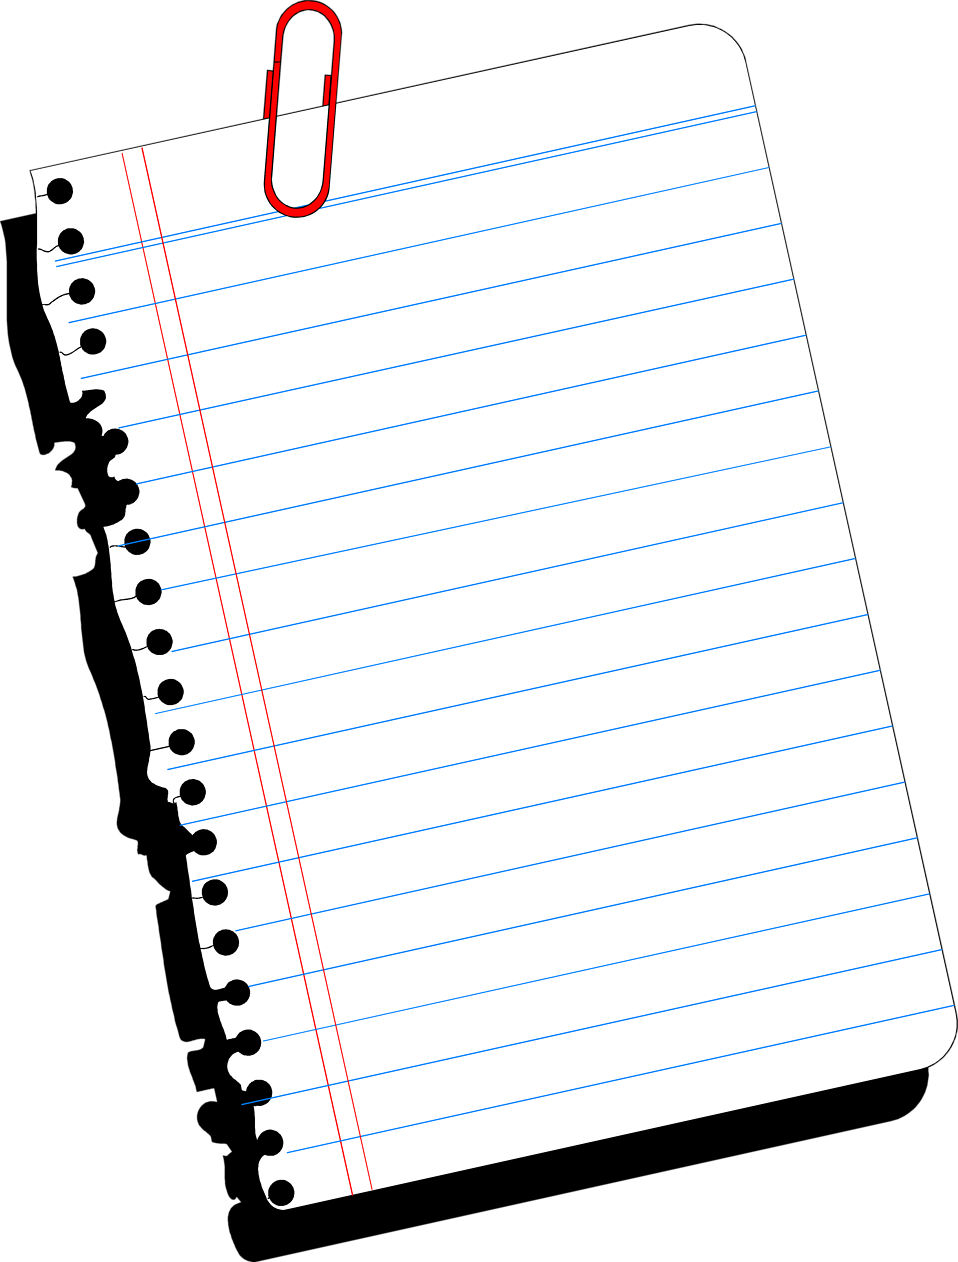 Paper   Free Stock Photo   Illustration Of A Blank Notebook Paper